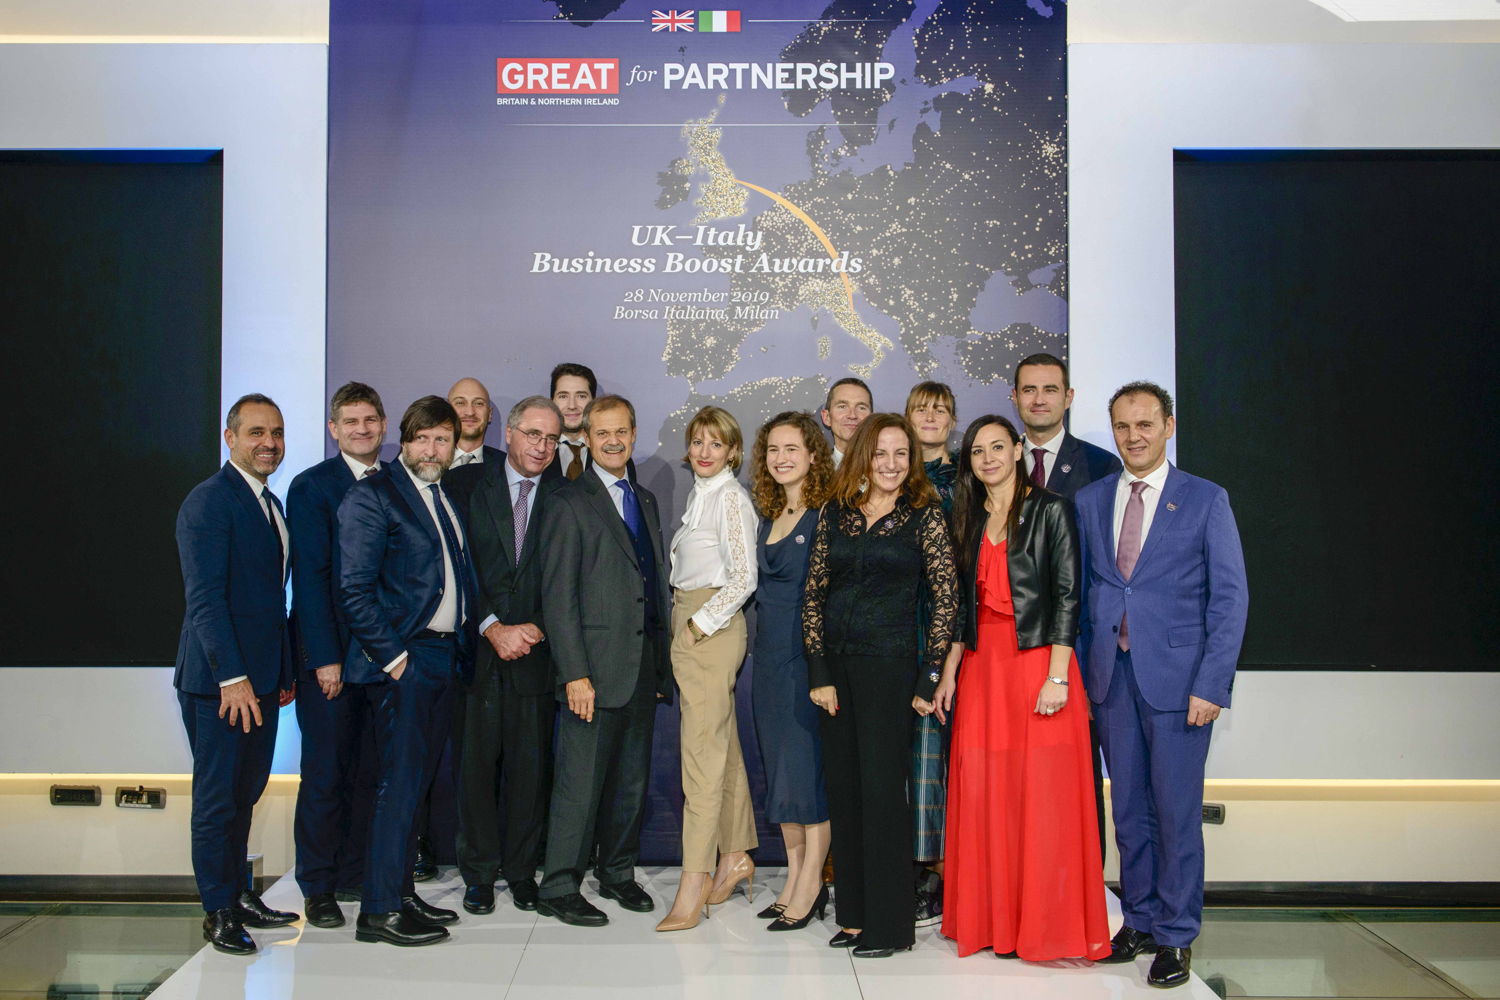 UK-Italy Business Boost Awards 